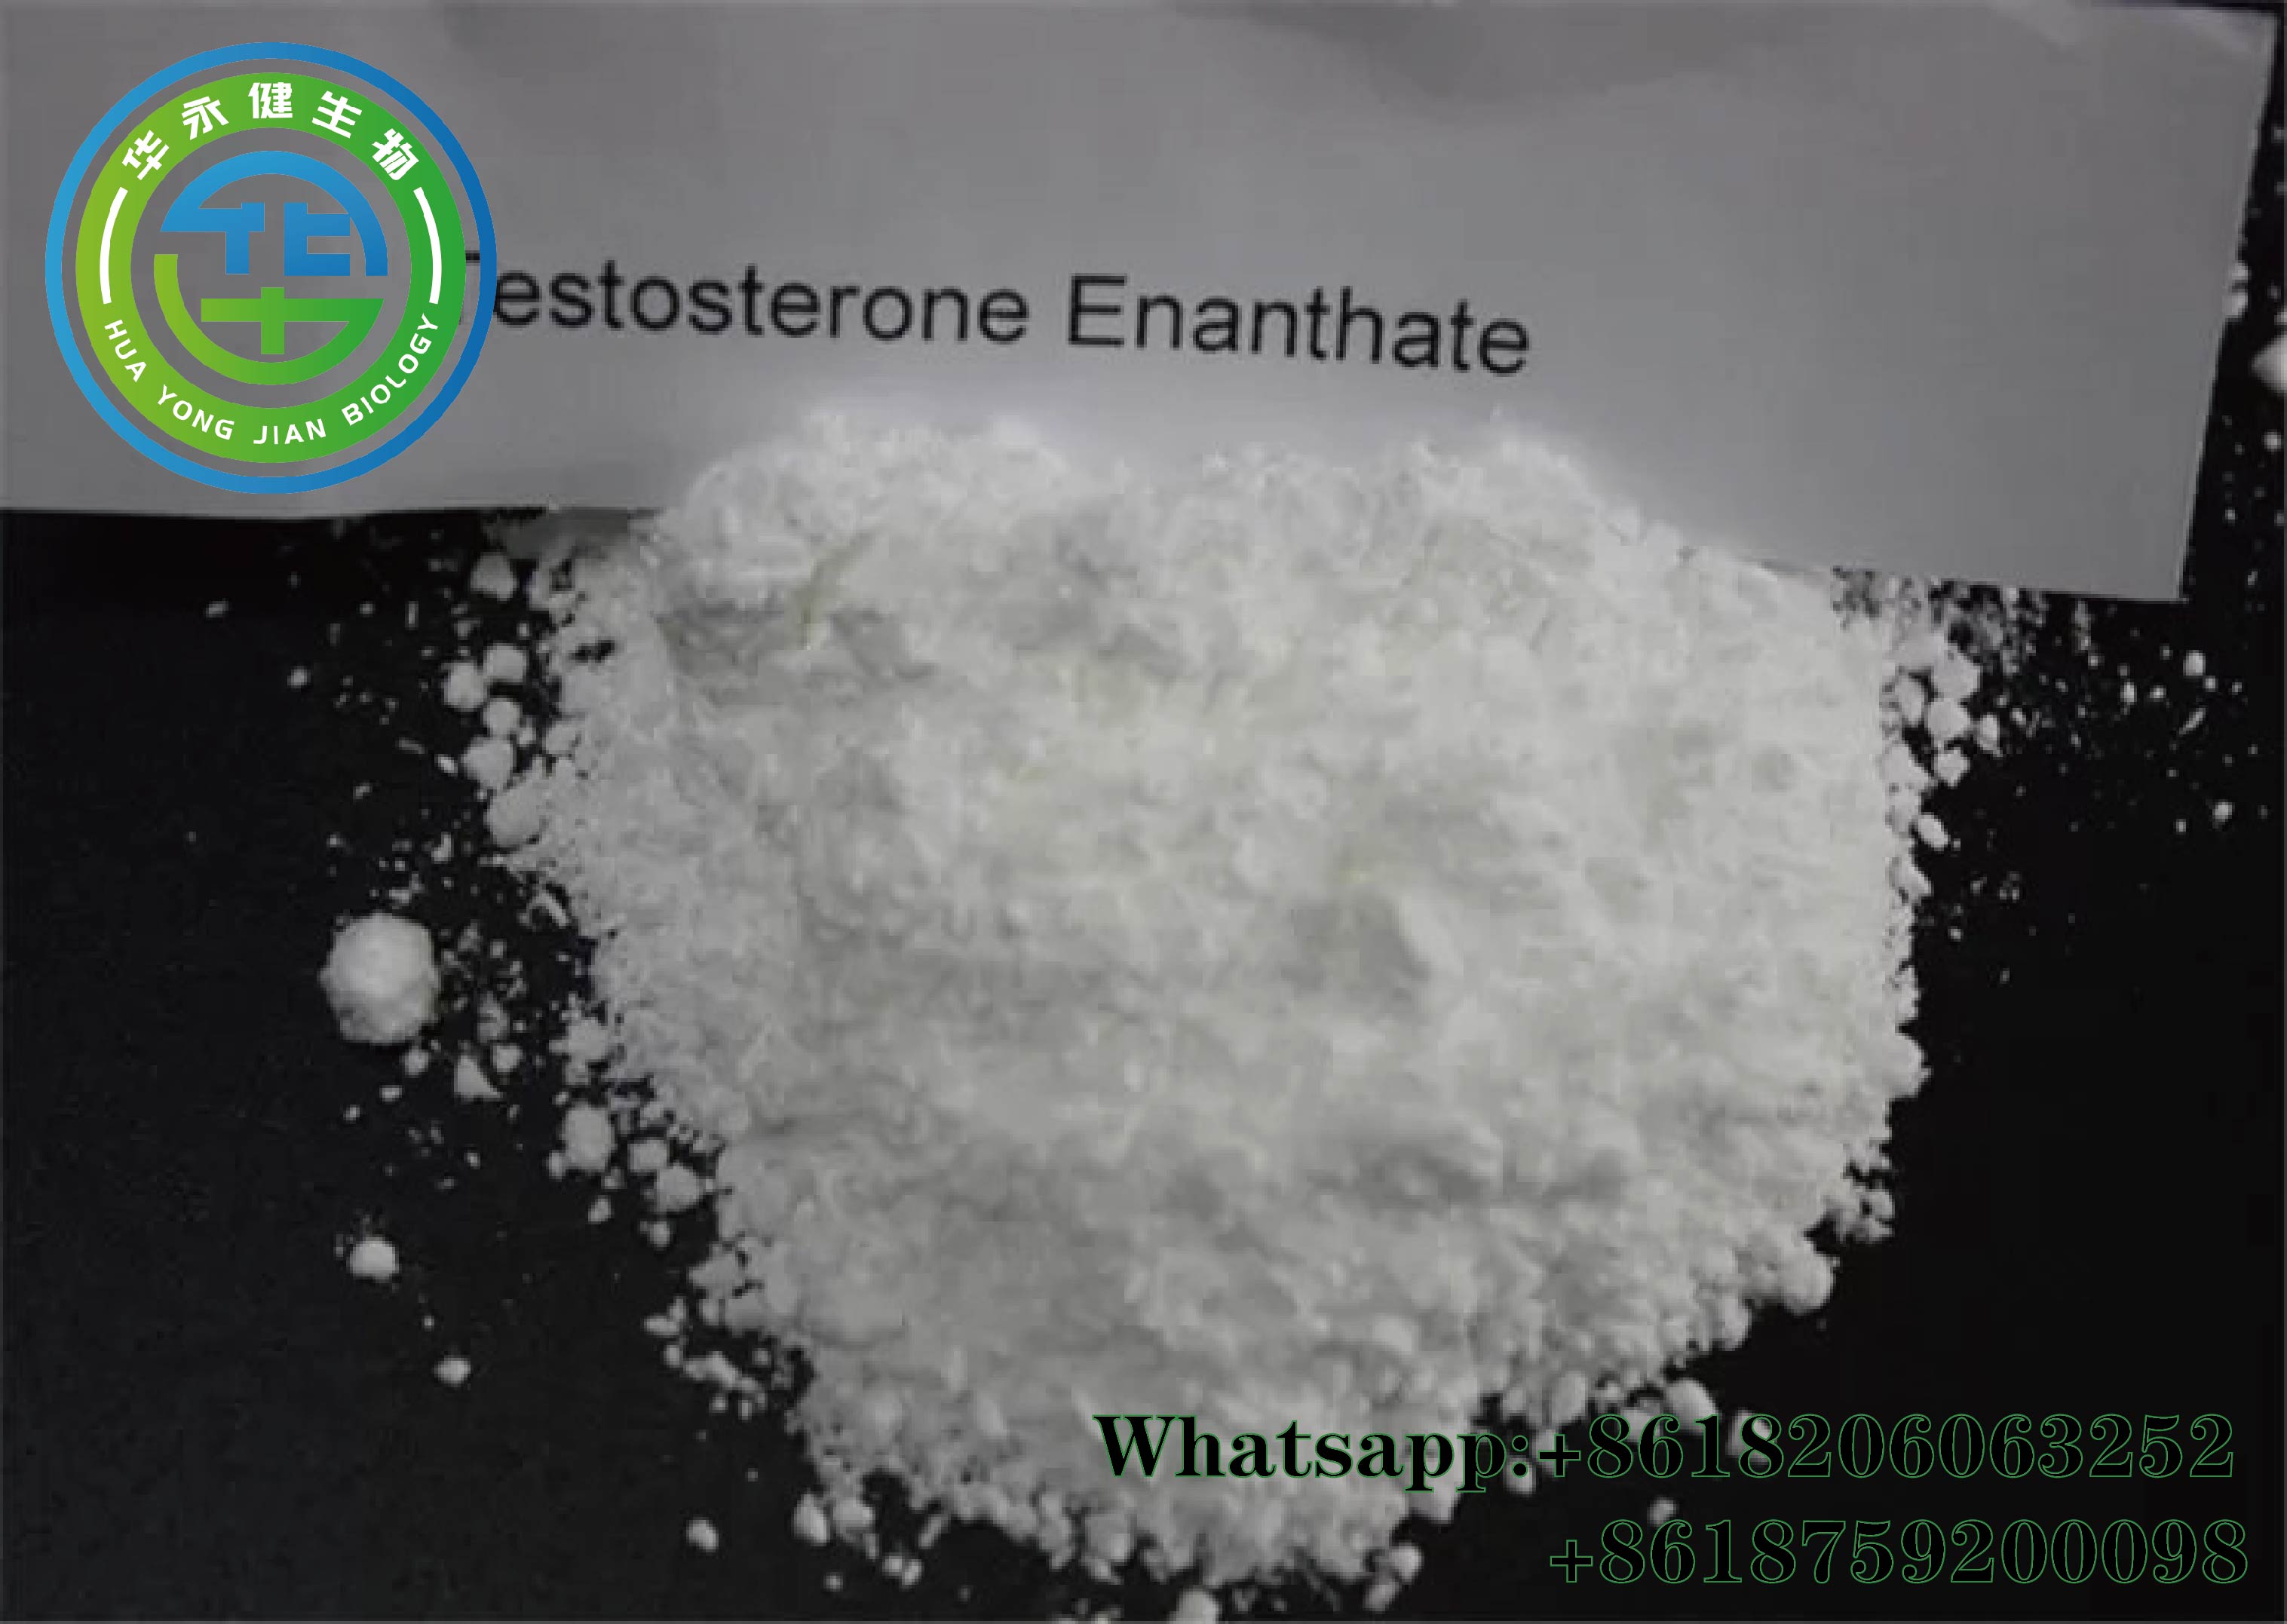 Cosmetics Package for Testosterone Enanthate Raw Steroid Powder CasNO.315-37-7